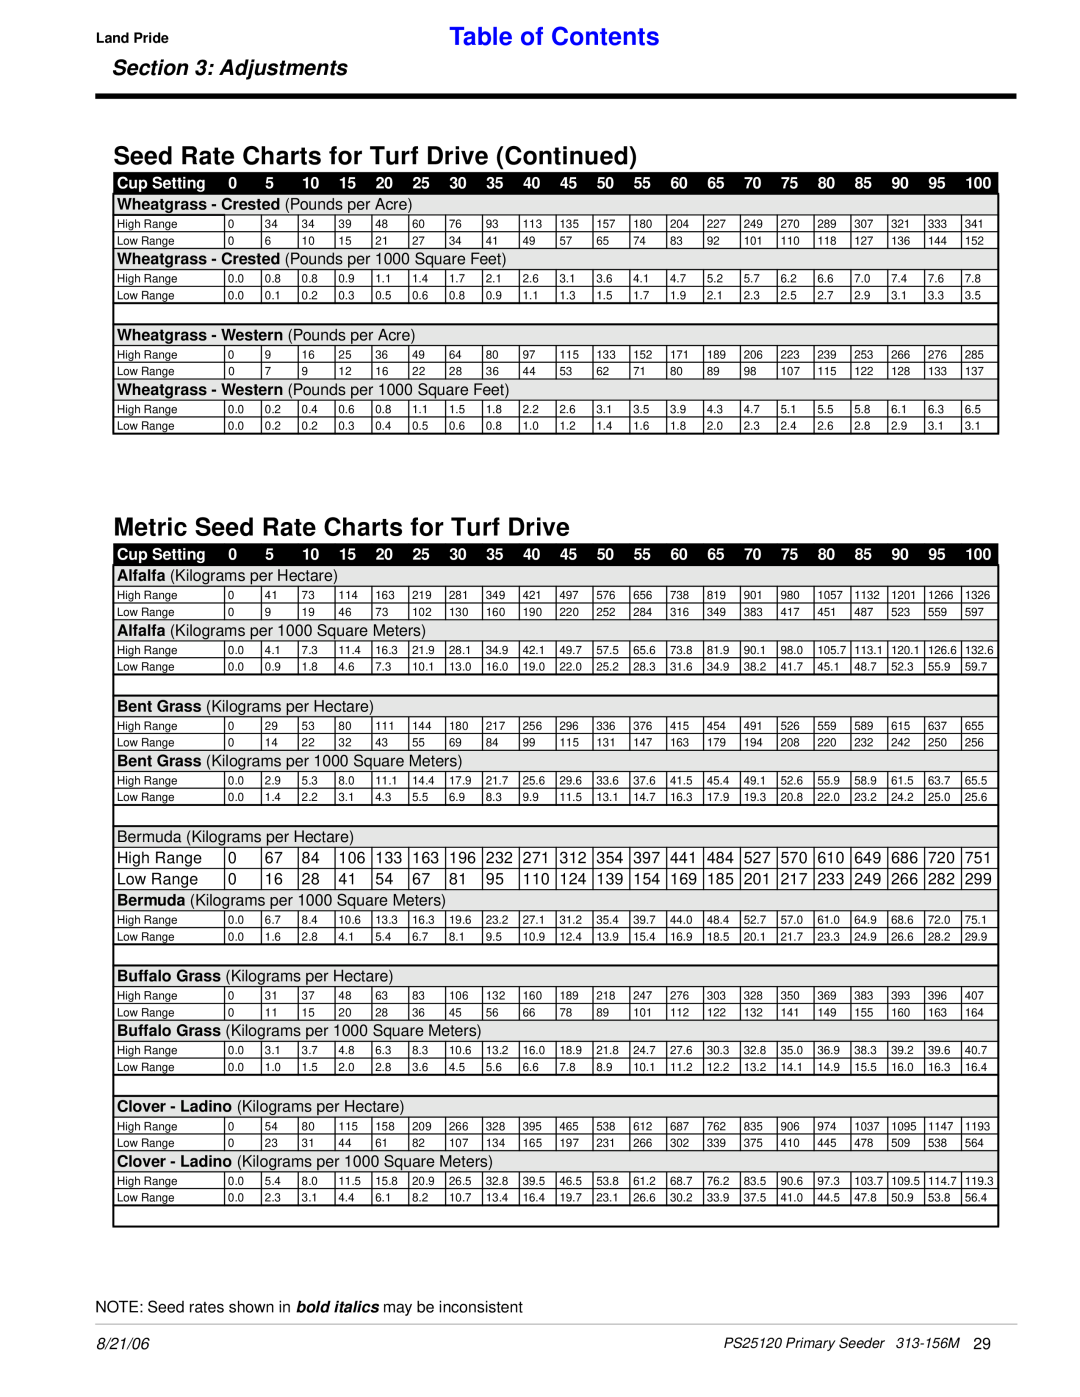 Land Pride PS25120 Metric Seed Rate Charts for Turf Drive, Seed Rate Charts for Turf Drive Continued, Table of Contents 